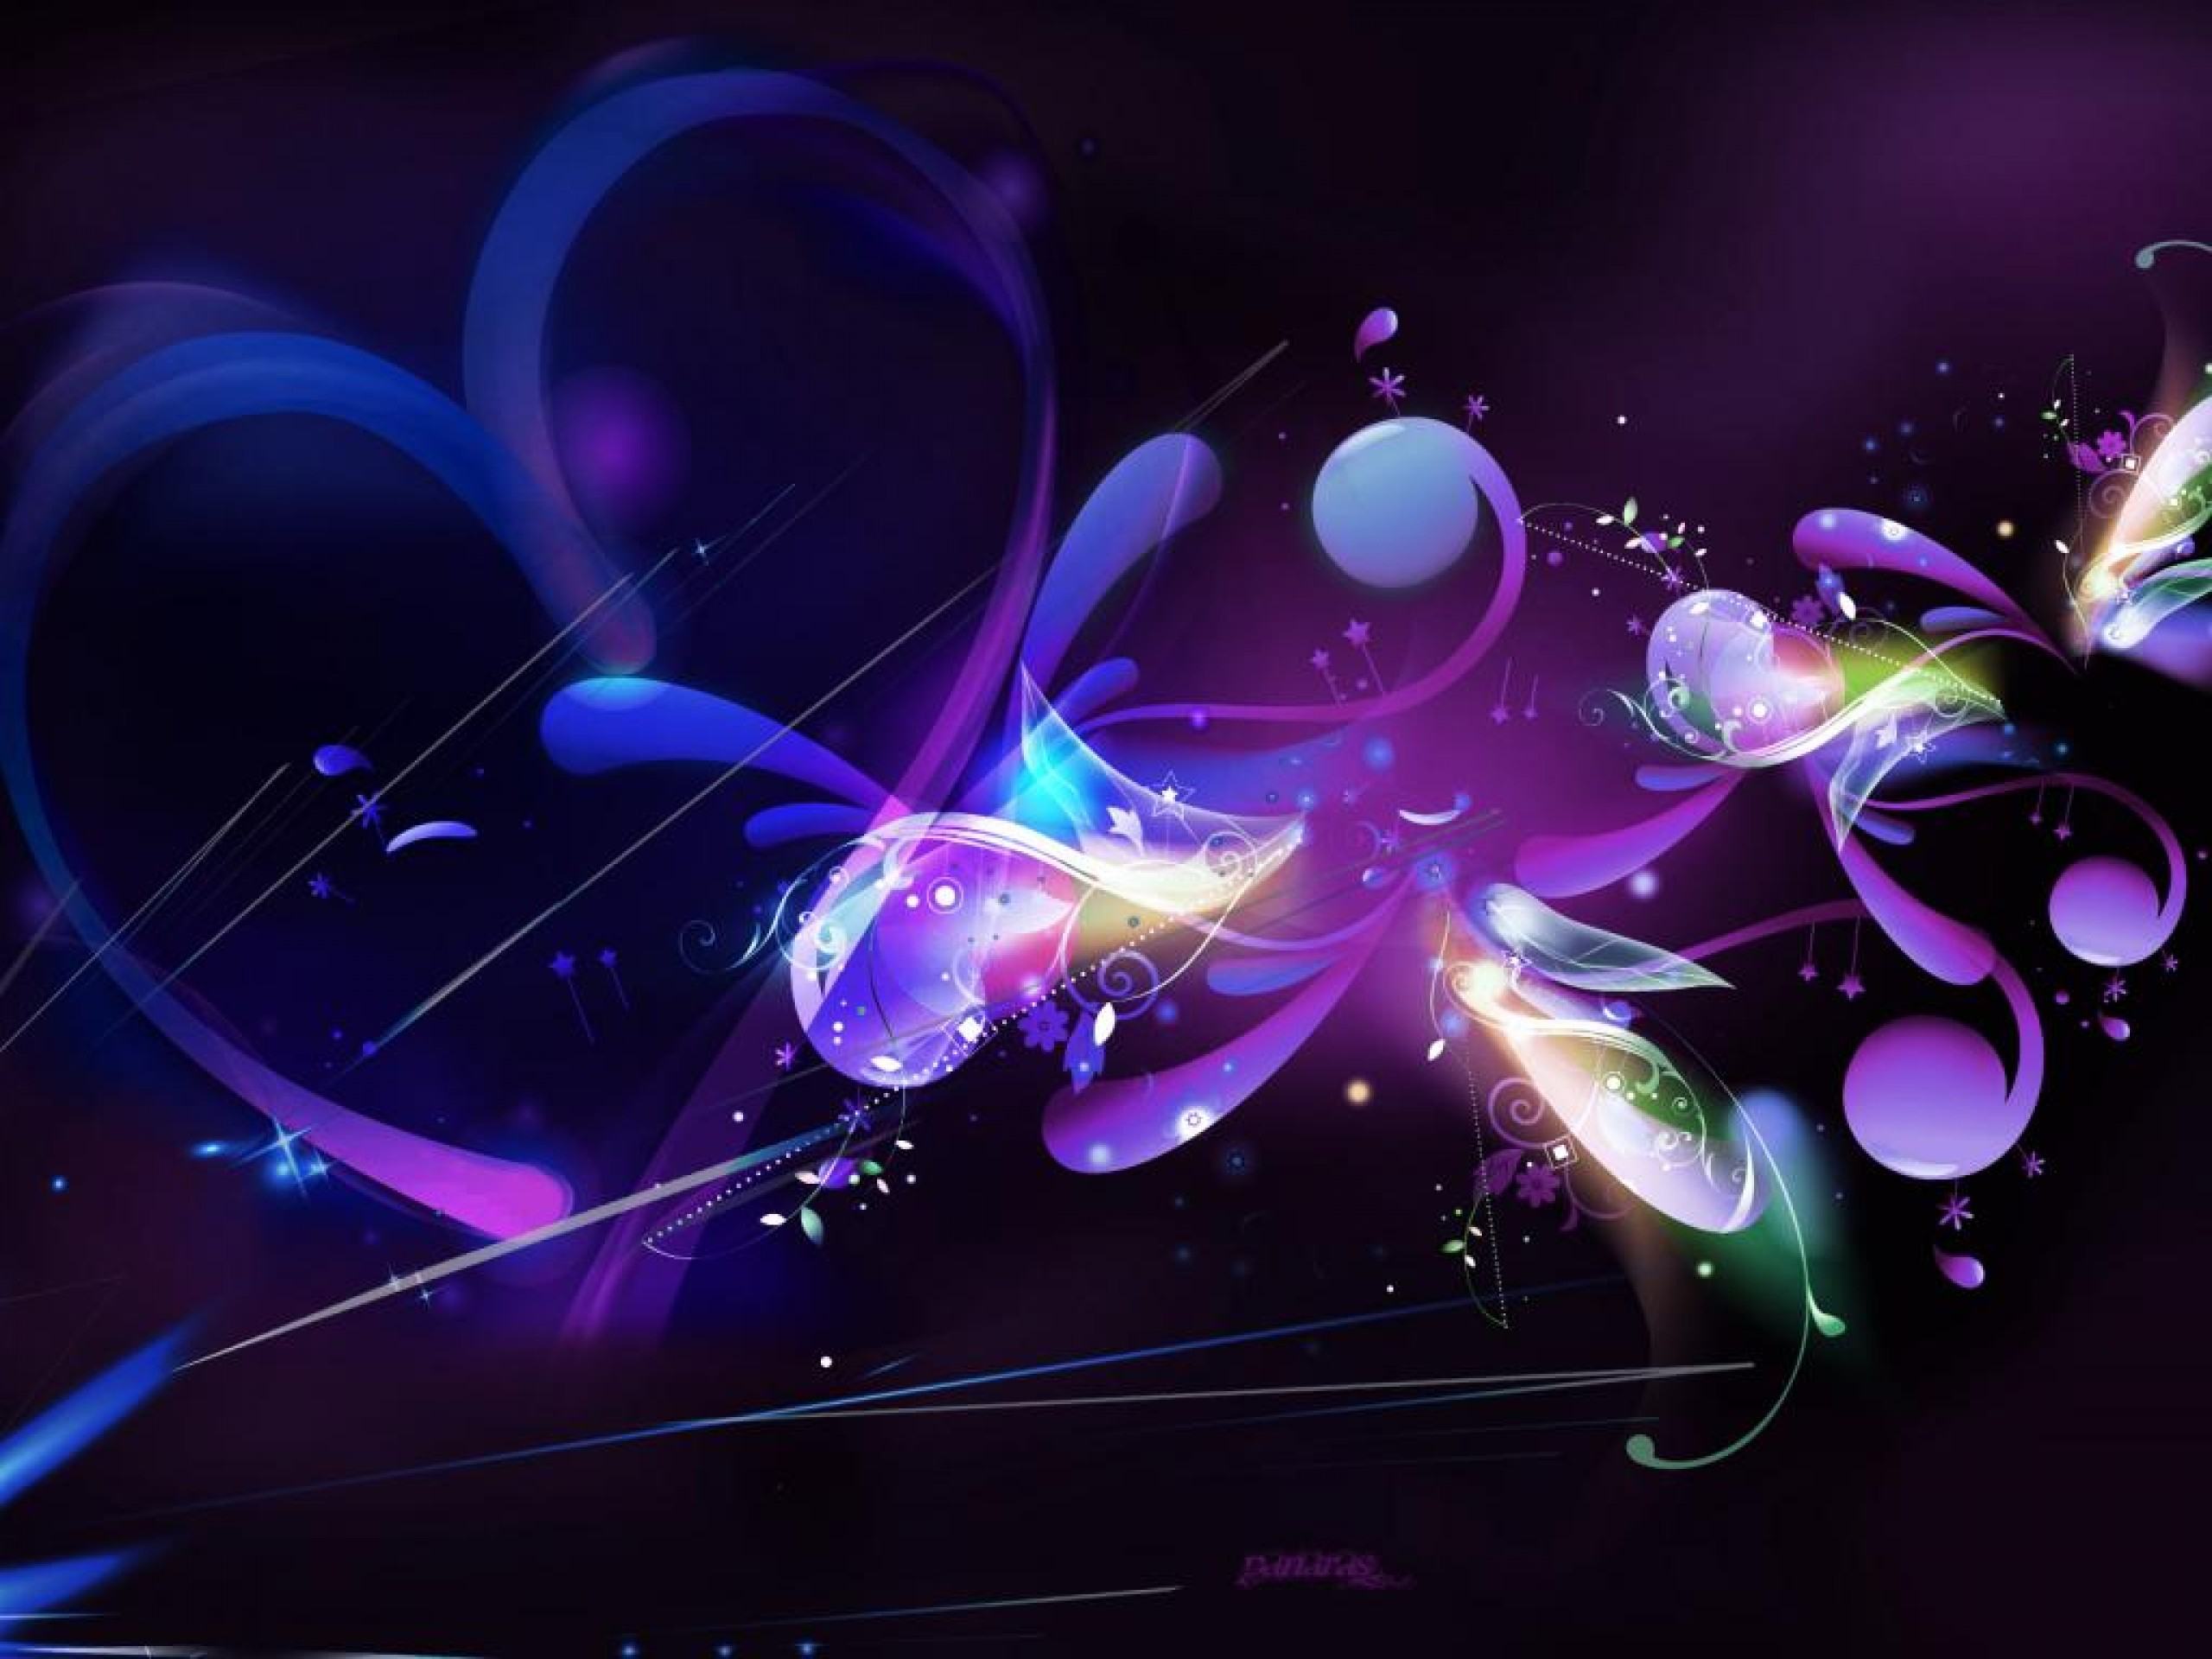 Download Free Wallpapers Backgrounds - Bee purple flowers Wallpapers Preview Abstract